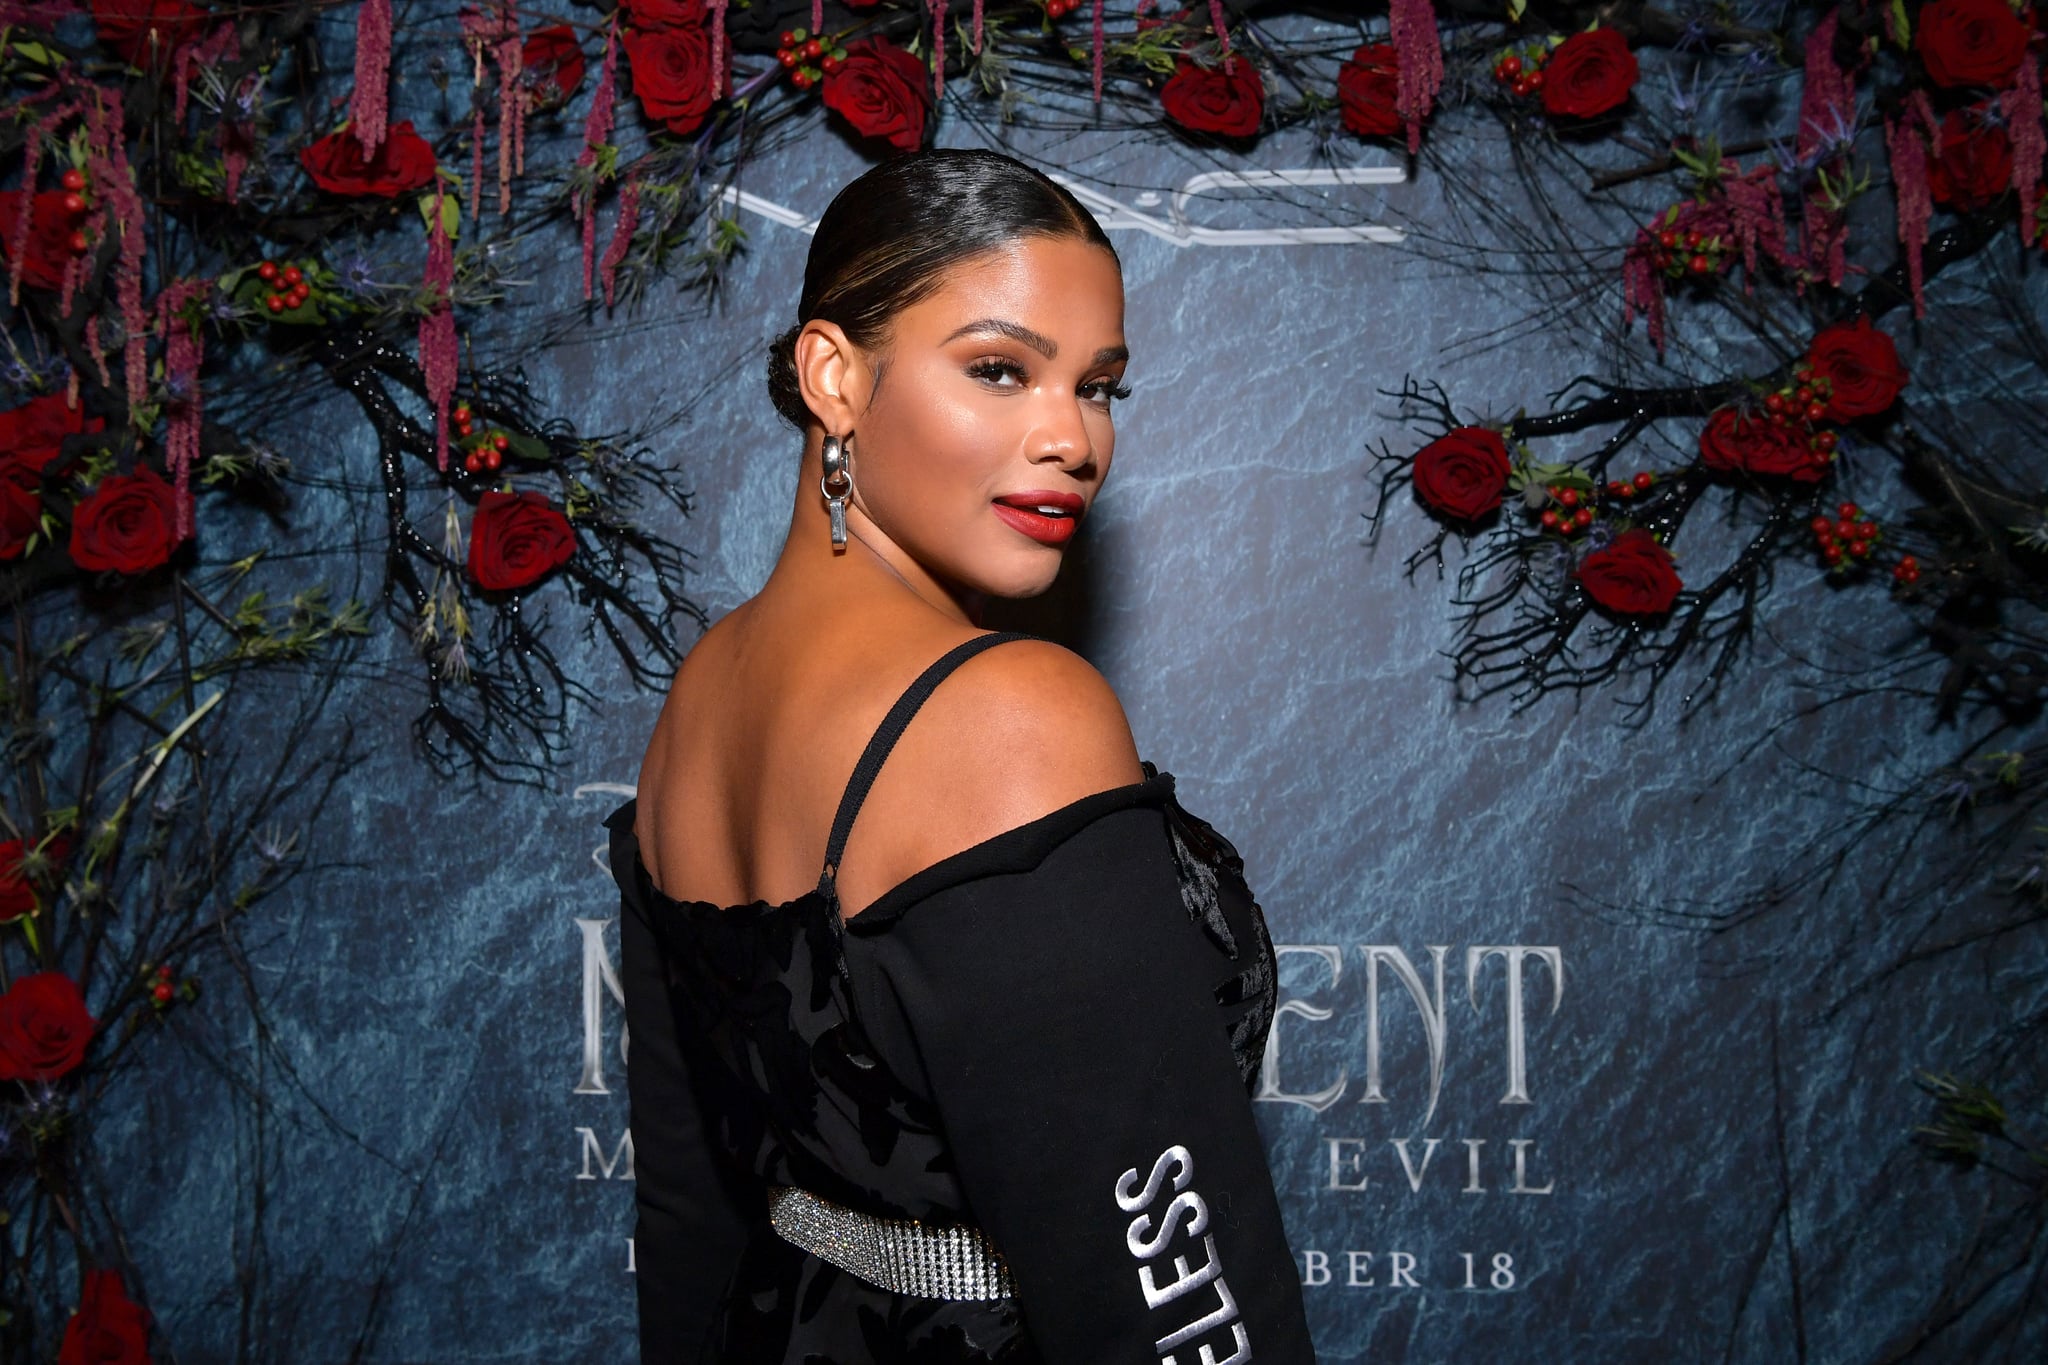 HOLLYWOOD, CALIFORNIA - SEPTEMBER 29: Kamie Crawford attends Disney's Maleficent by MAC Cosmetics at Petit Ermitage on September 29, 2019 in Hollywood, California. (Photo by Emma McIntyre/Getty Images for MAC Cosmetics)